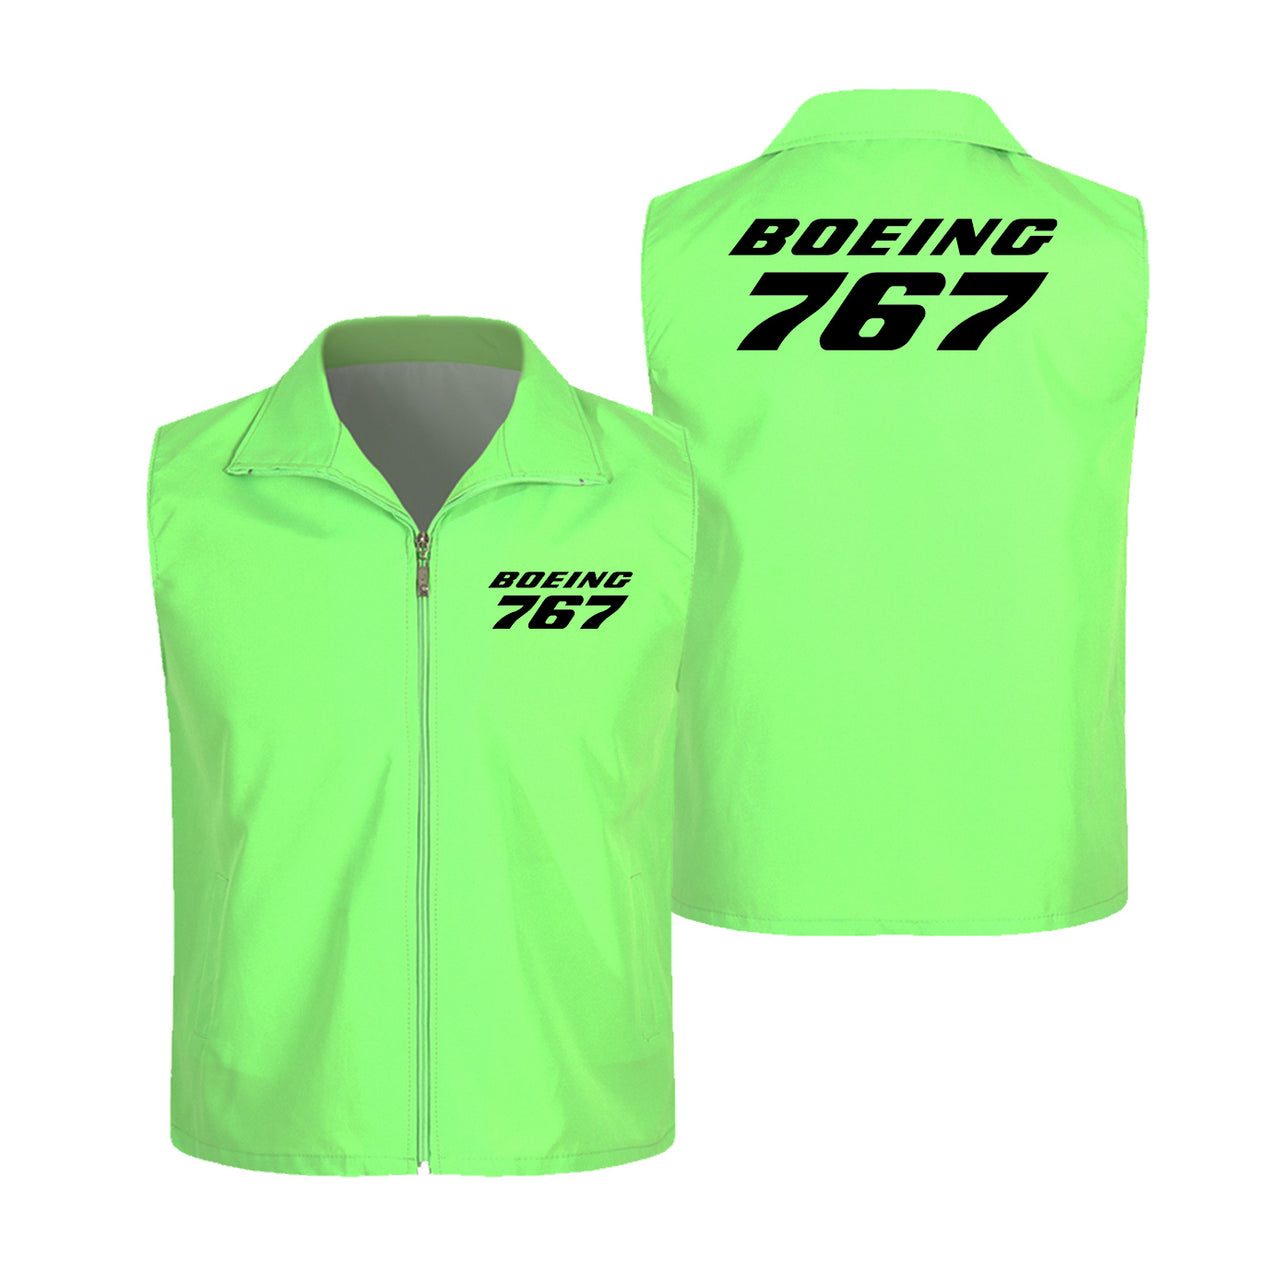 Boeing 767 & Text Designed Thin Style Vests